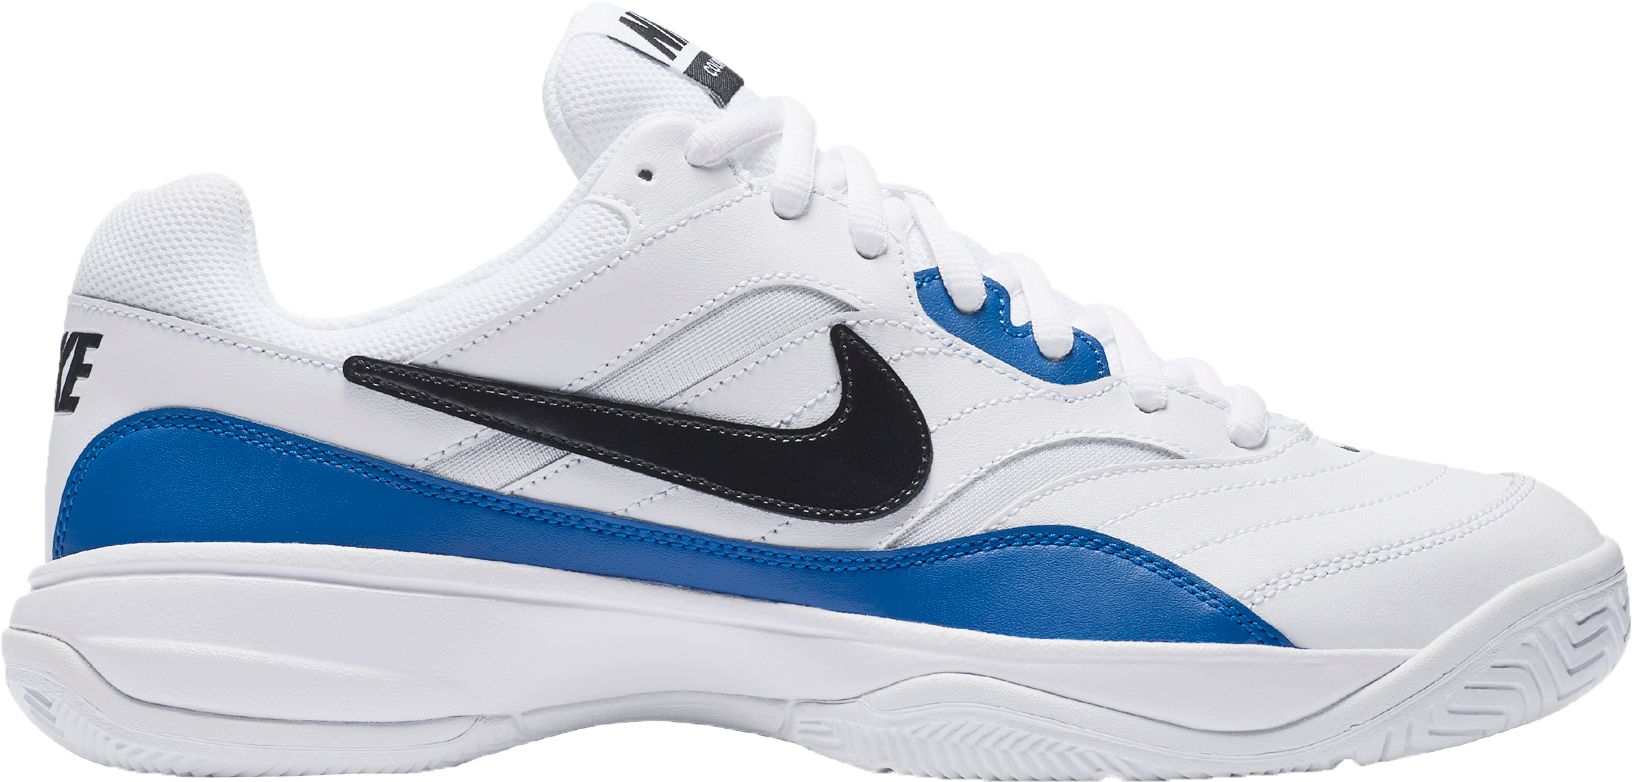 Men's Tennis Shoes for Sale | DICK'S Sporting Goods